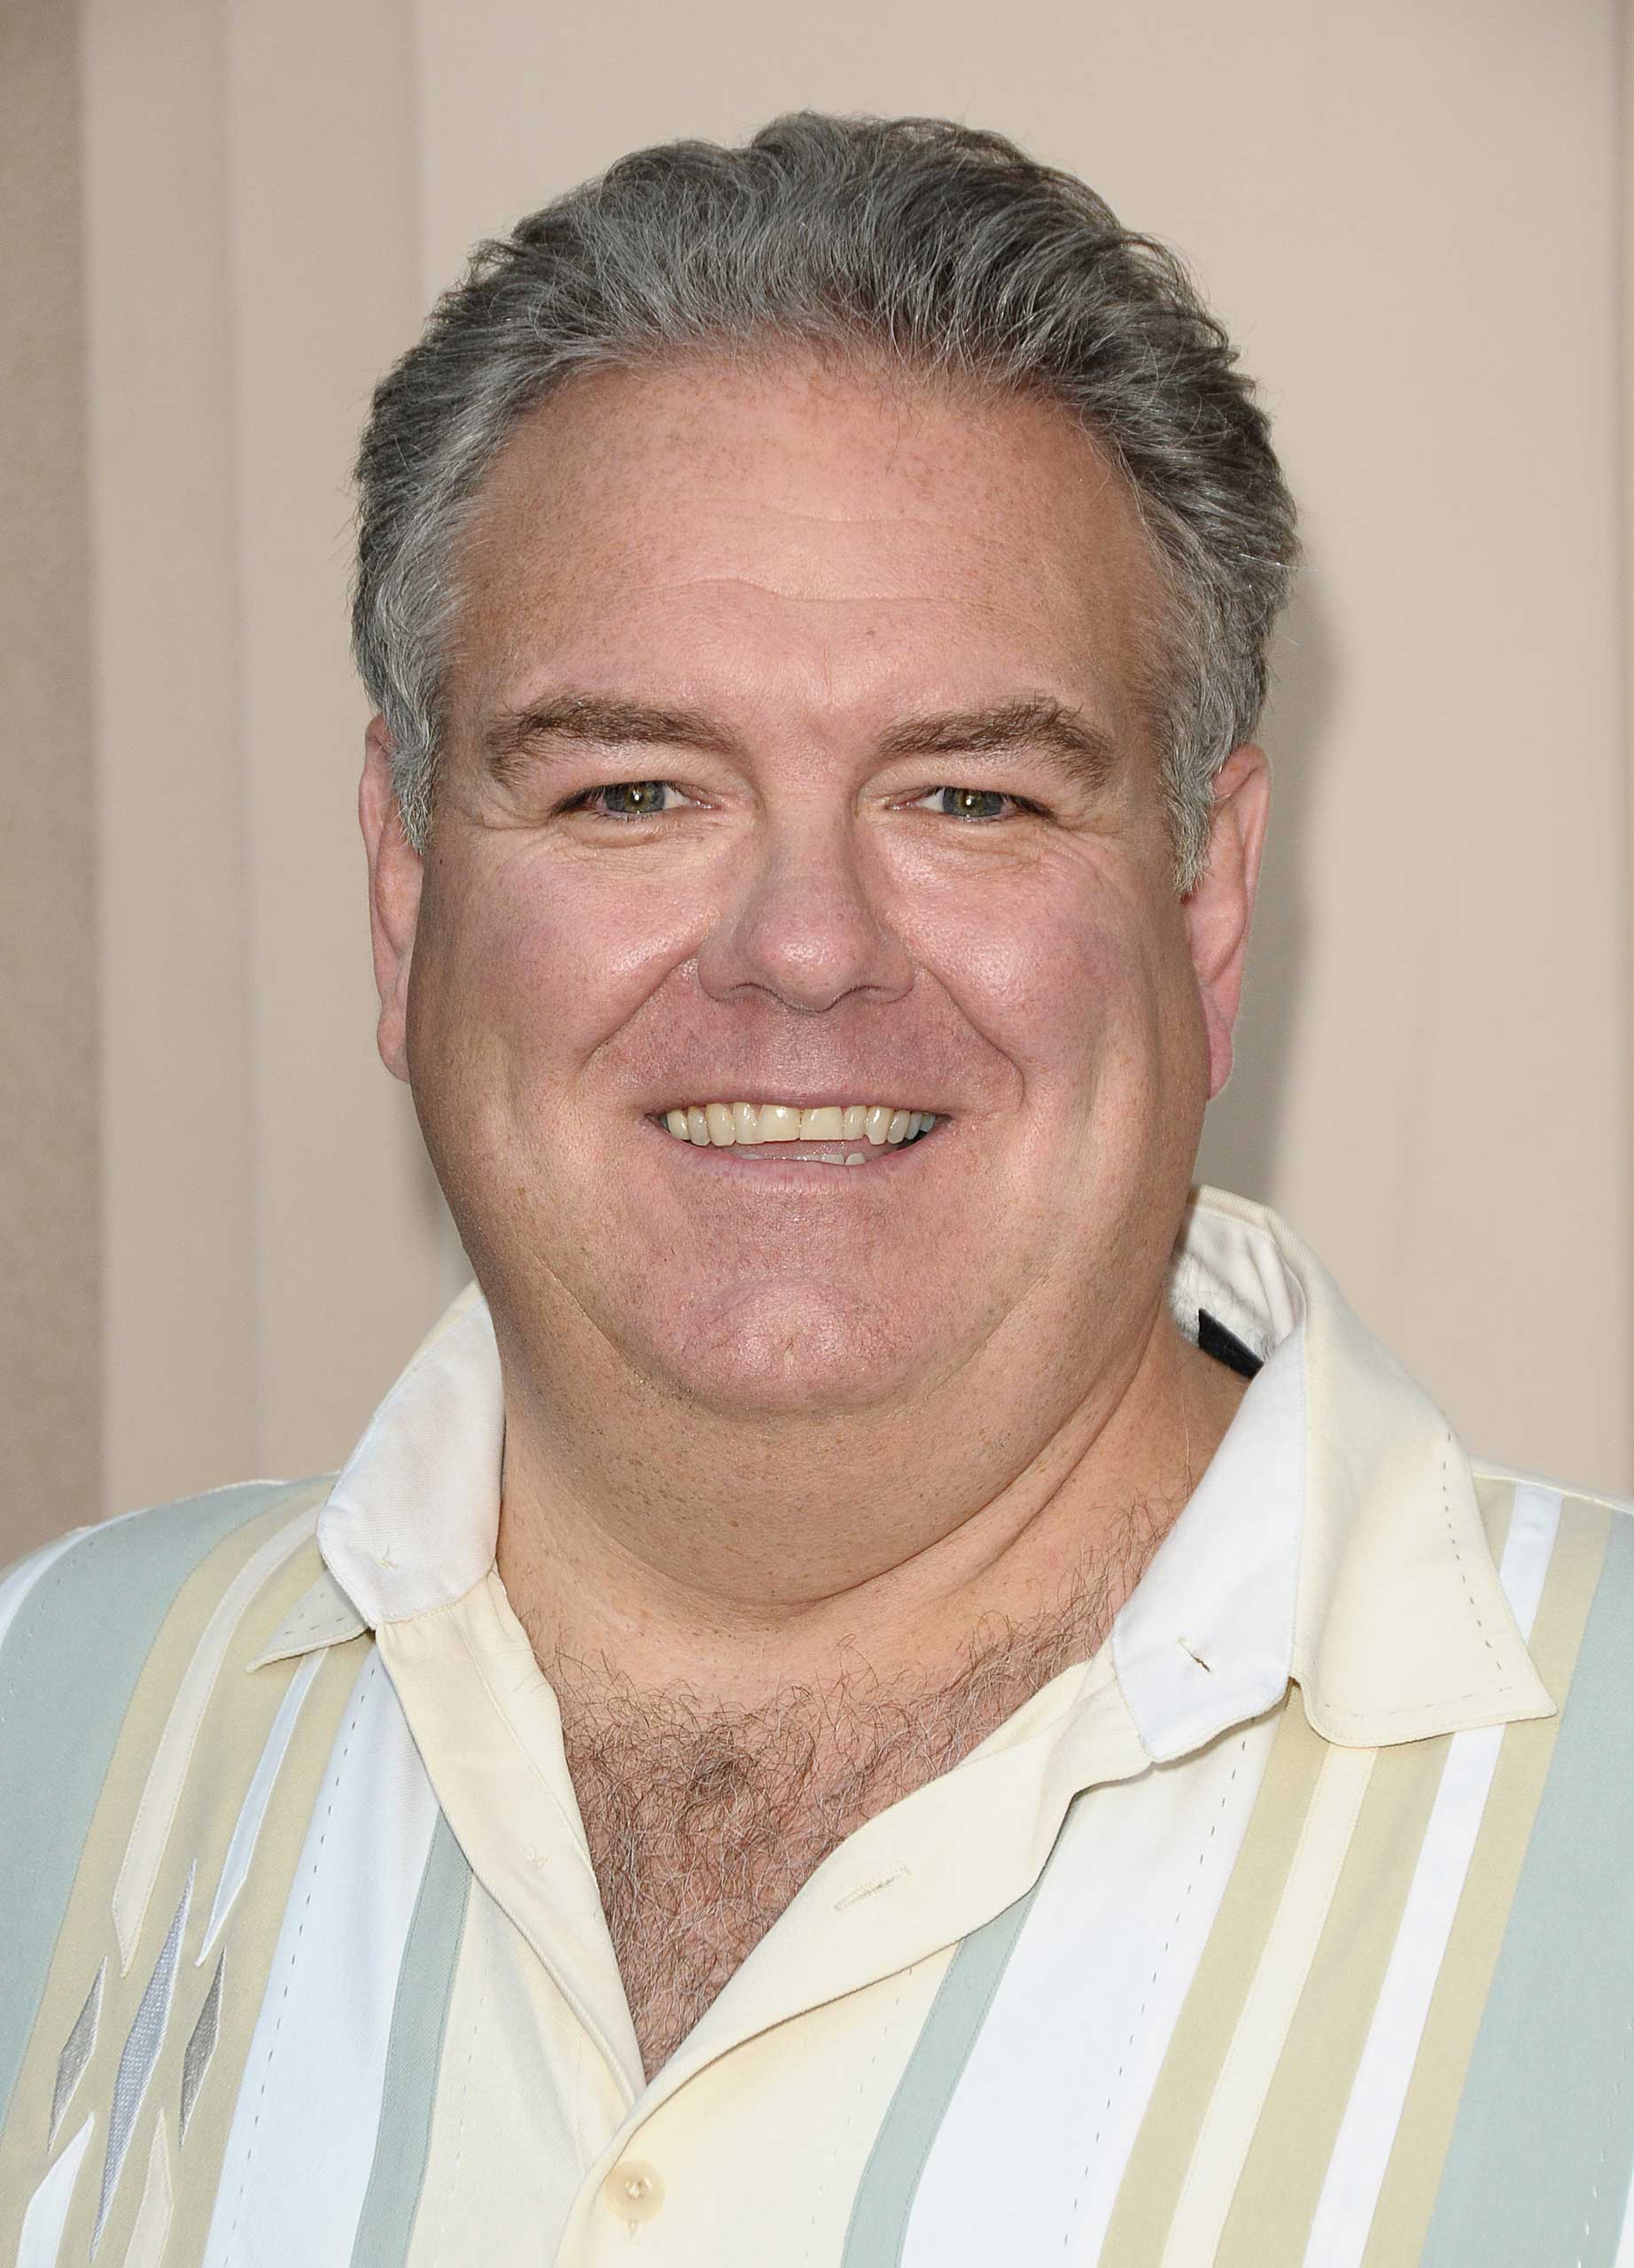 Actor Jim O'Heir attends the "Parks And Recreation" Emmy screening at Leonard H. Goldenson Theatre on May 19, 2010 in Hollywood.